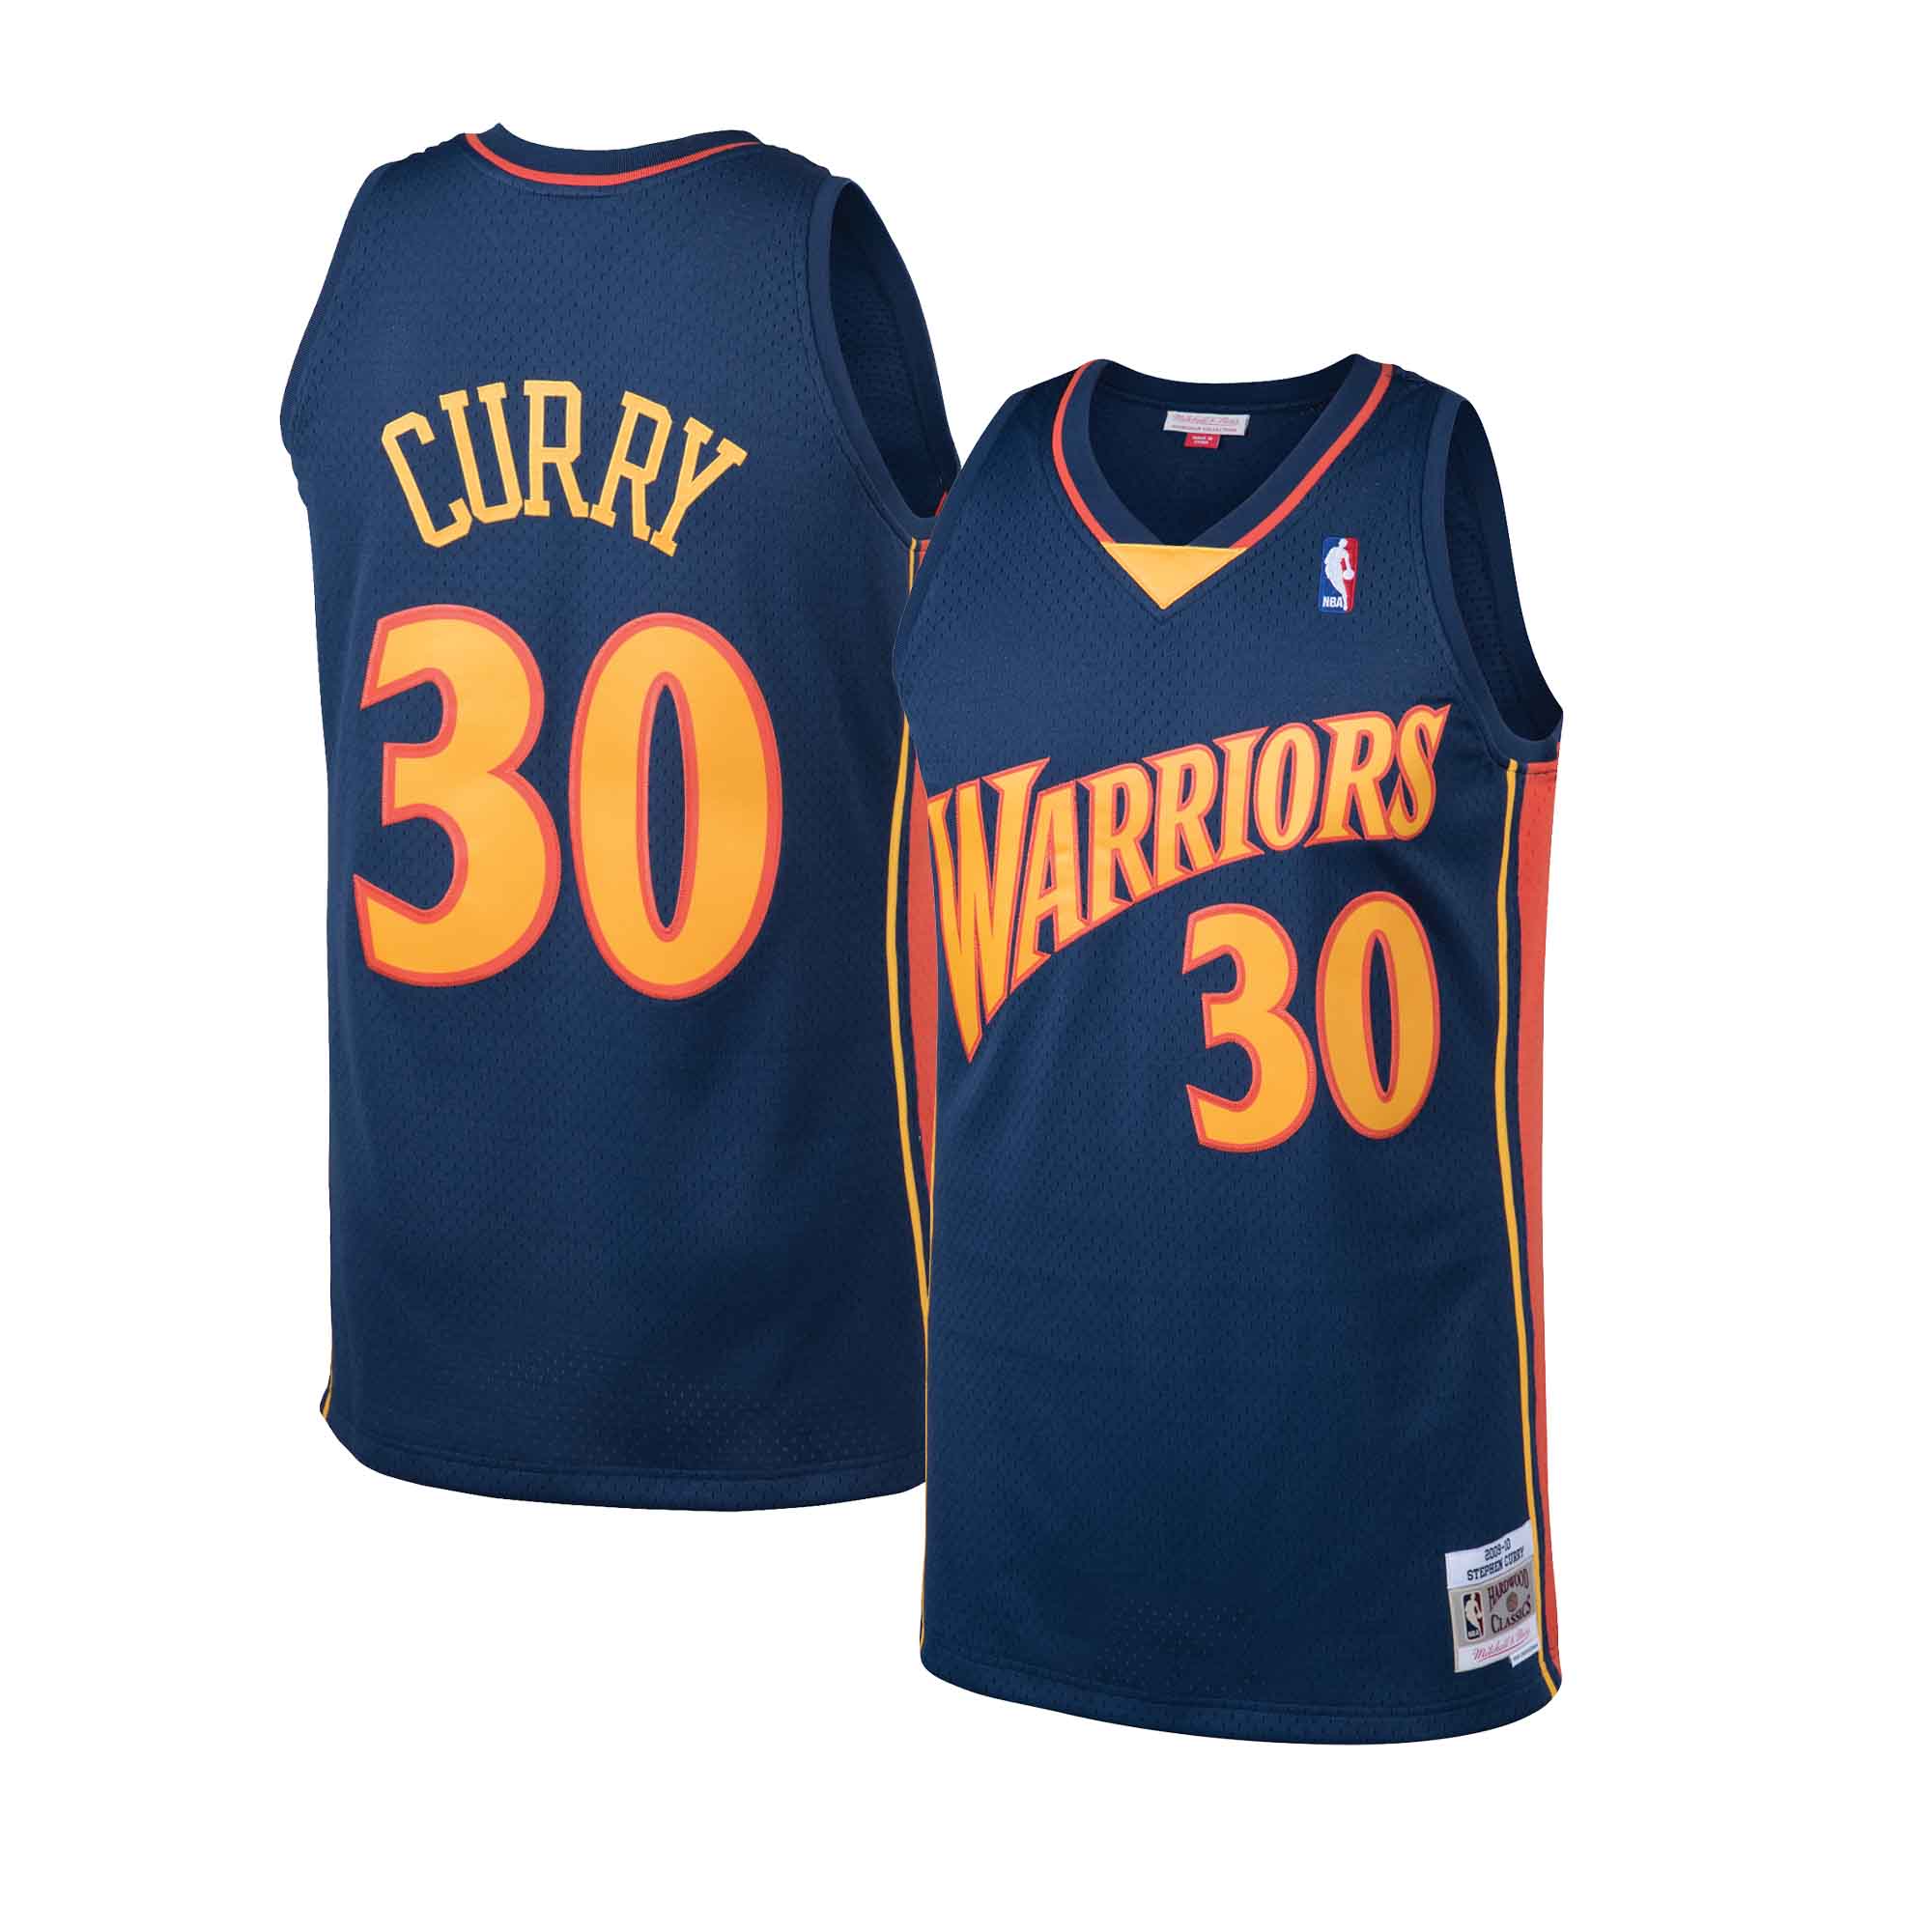 Stephen Curry Jerseys, Stephen Curry Shirts, Stephen Curry Gear